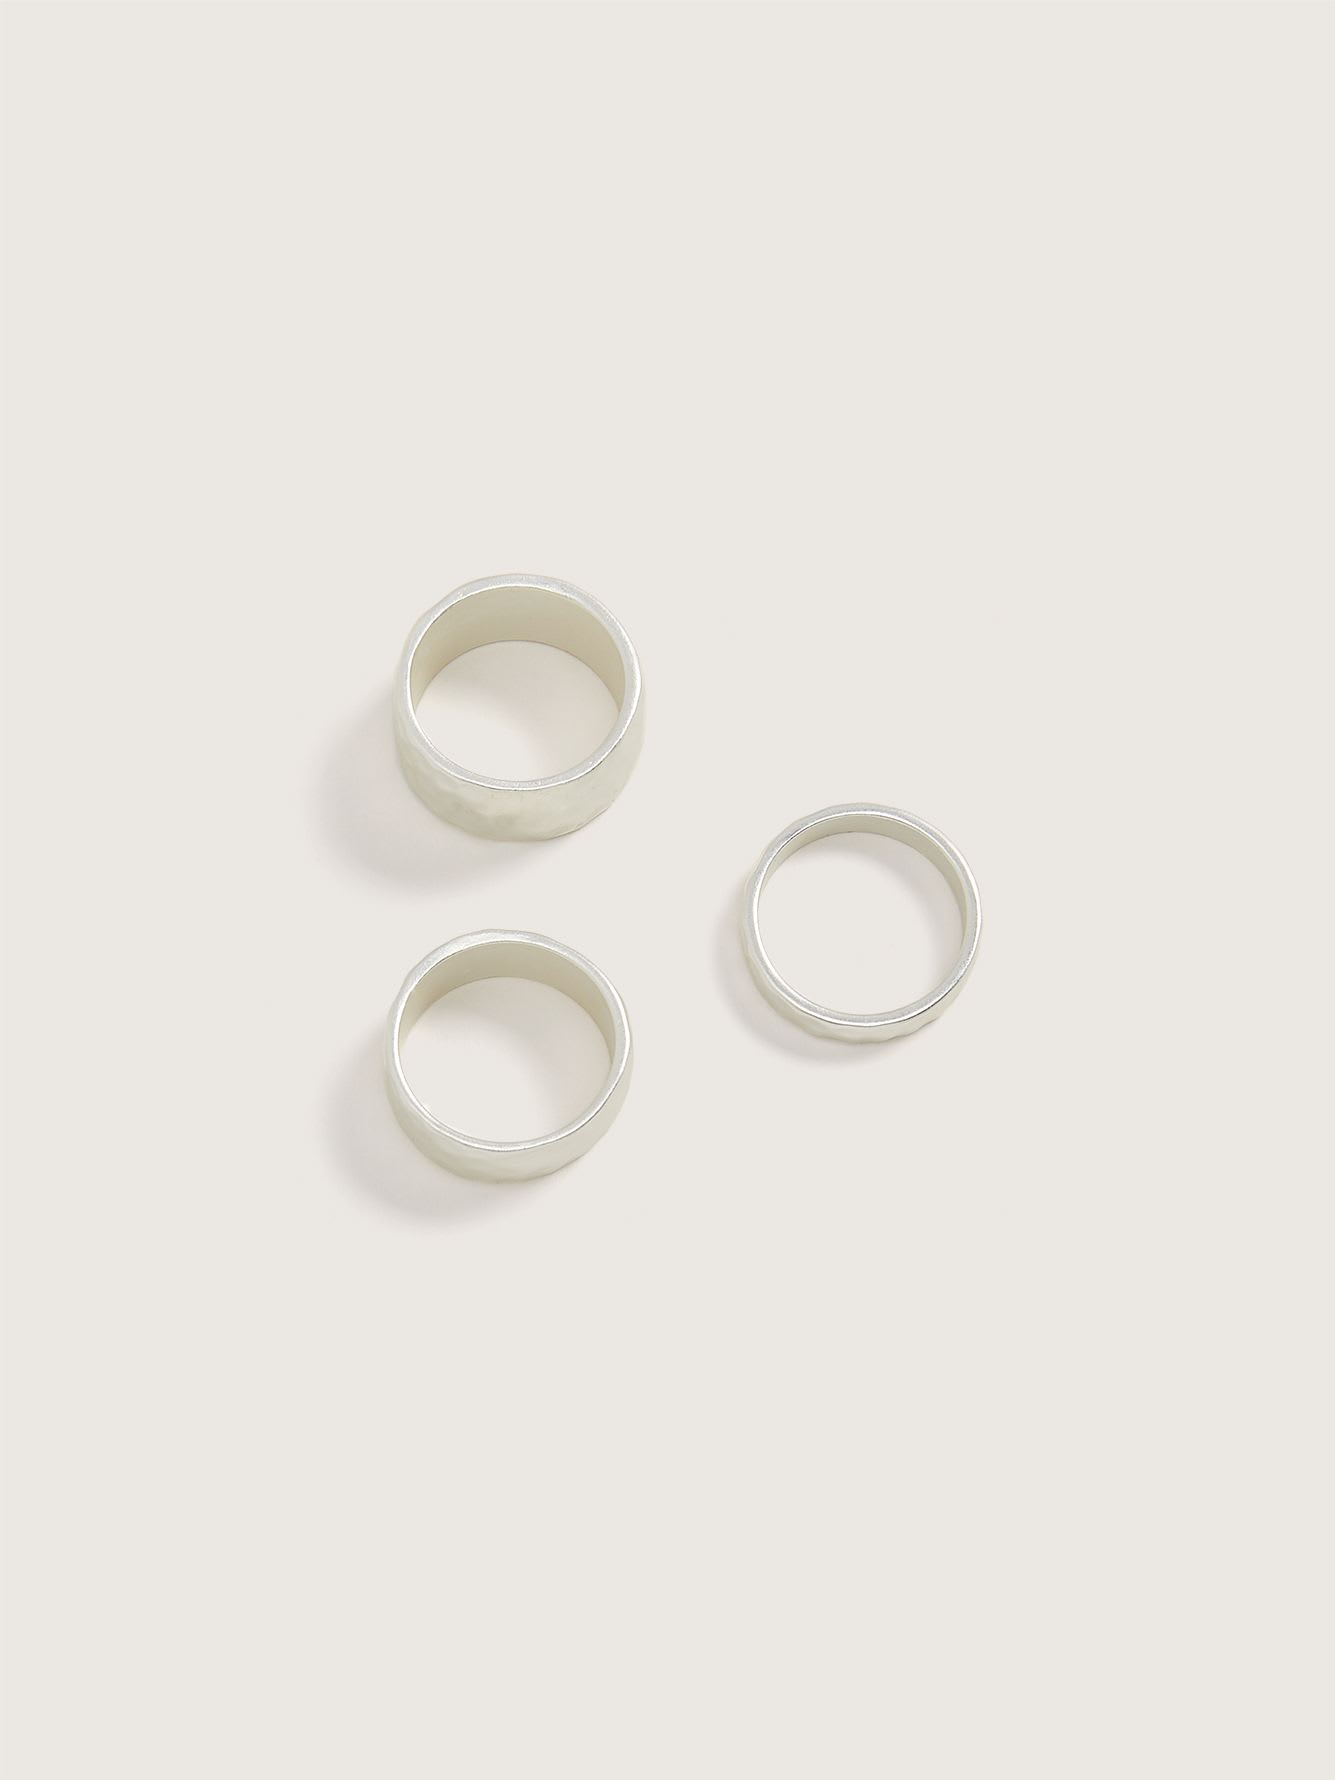 Hammered Rings, Set of 3